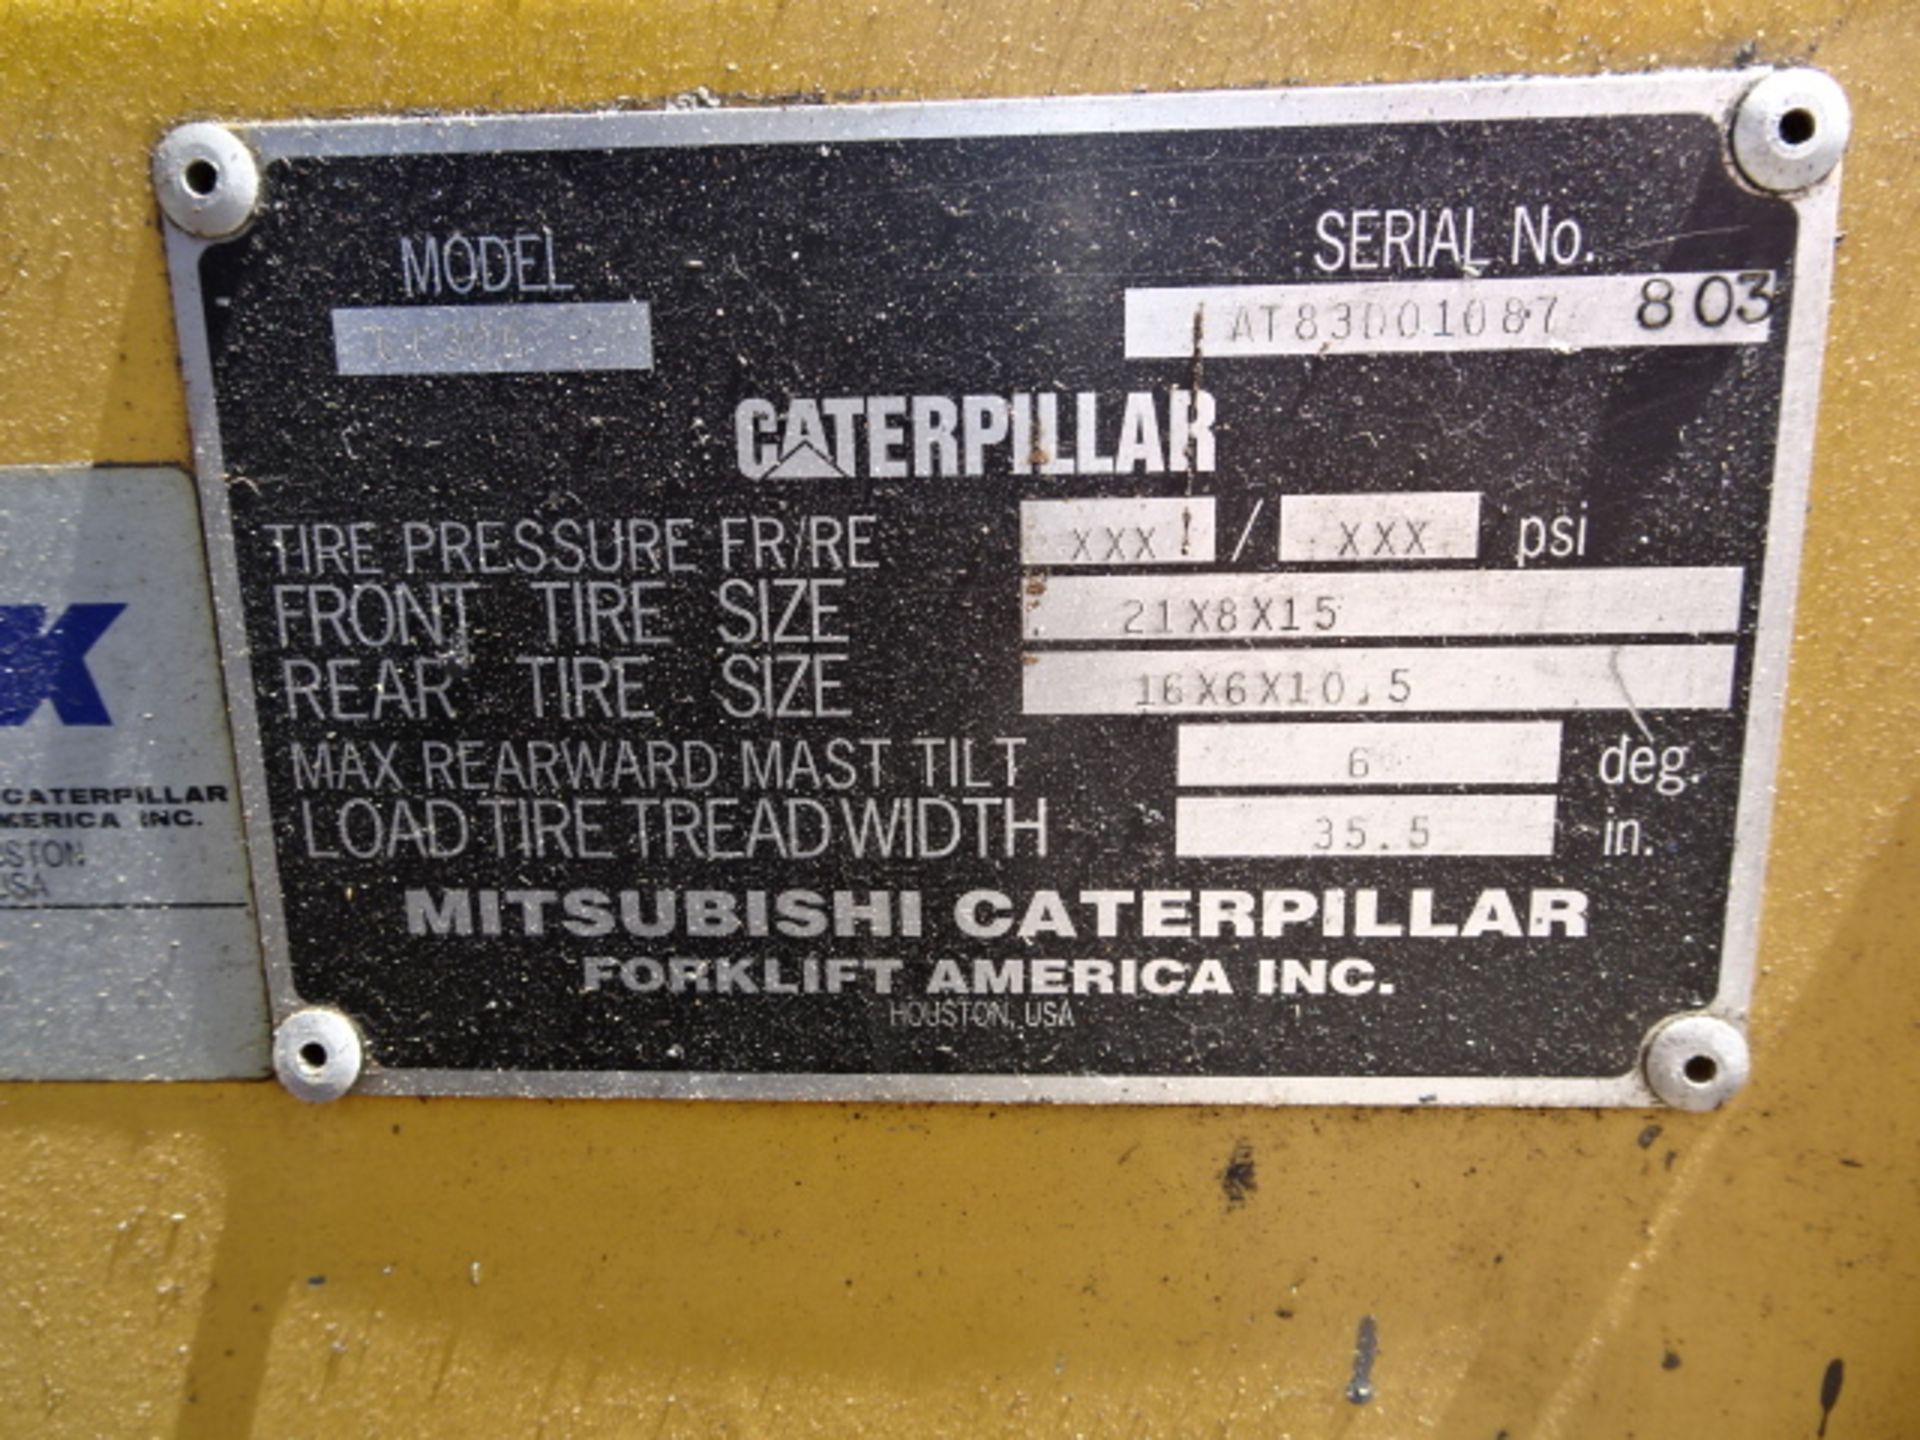 Caterpillar LPG 5000-Lb Forklift w/ Triple Mast, Side Shift, Solid Wide Track Tires, 10569 Hours, - Image 4 of 4